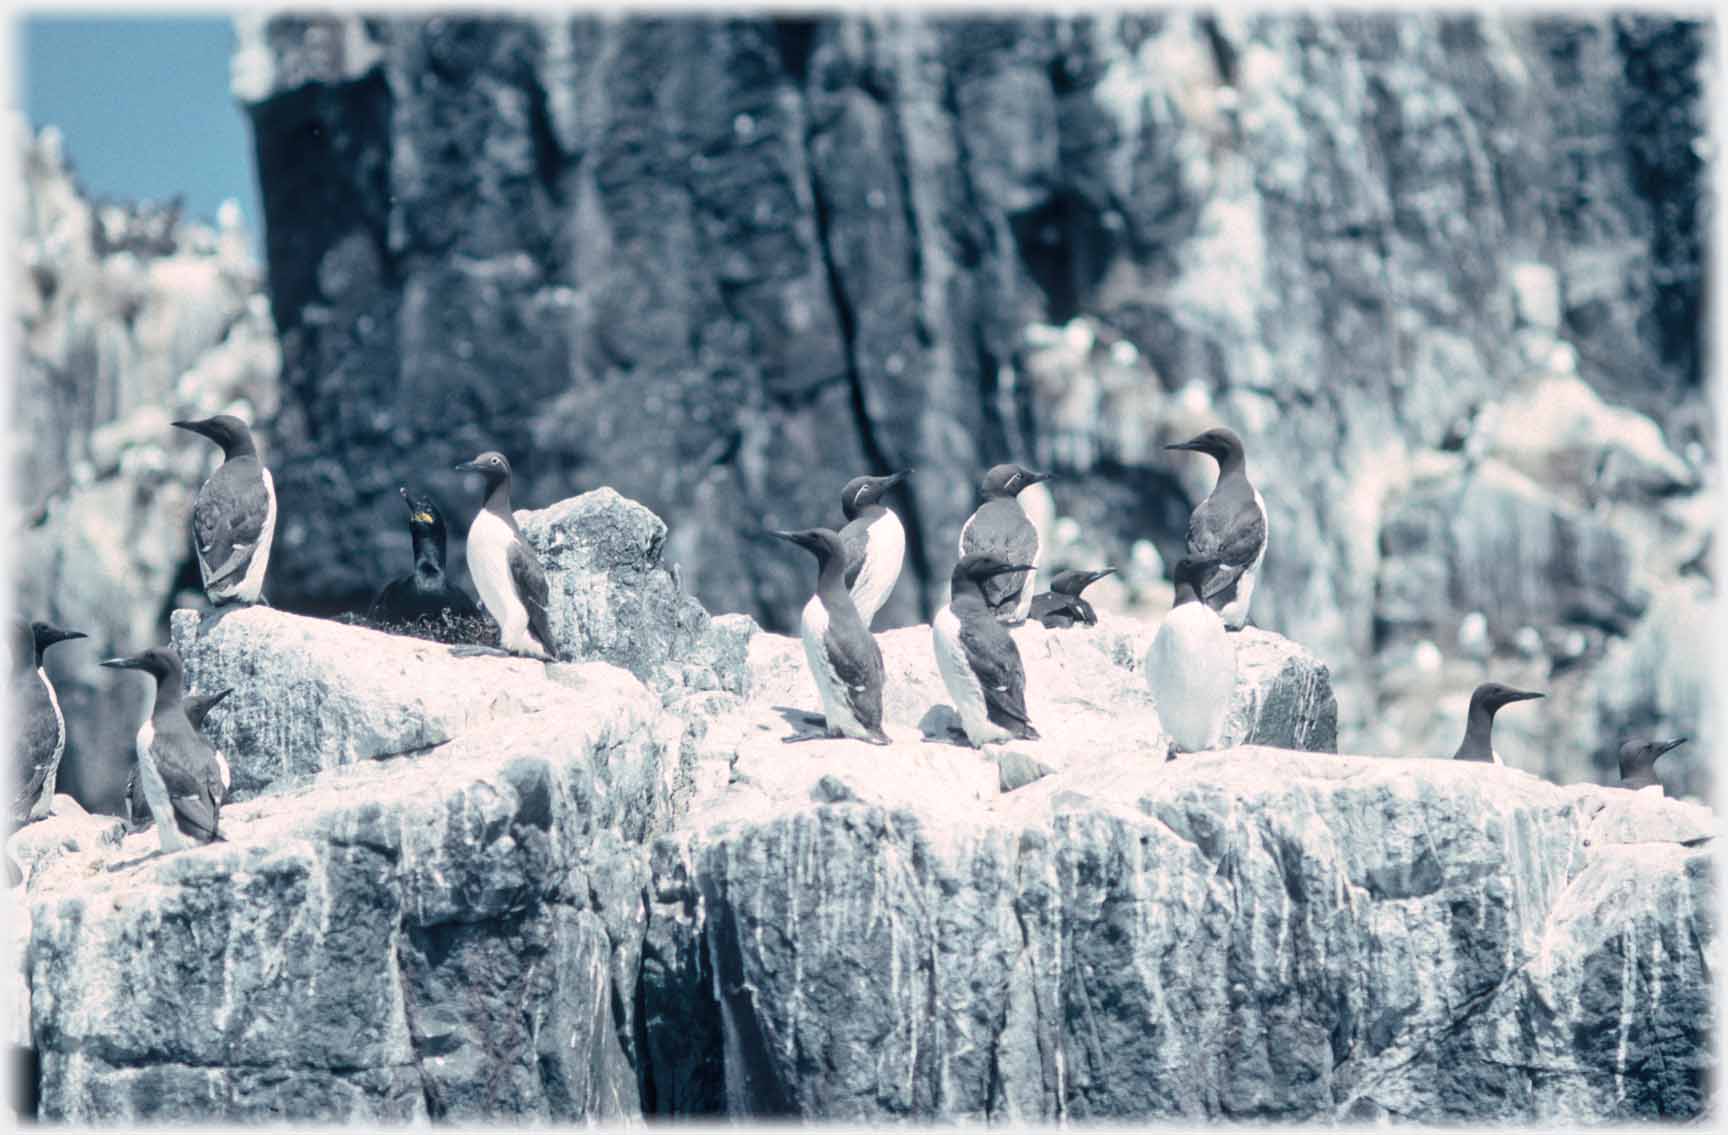 Small group of guillemots hard to see against black and white background.